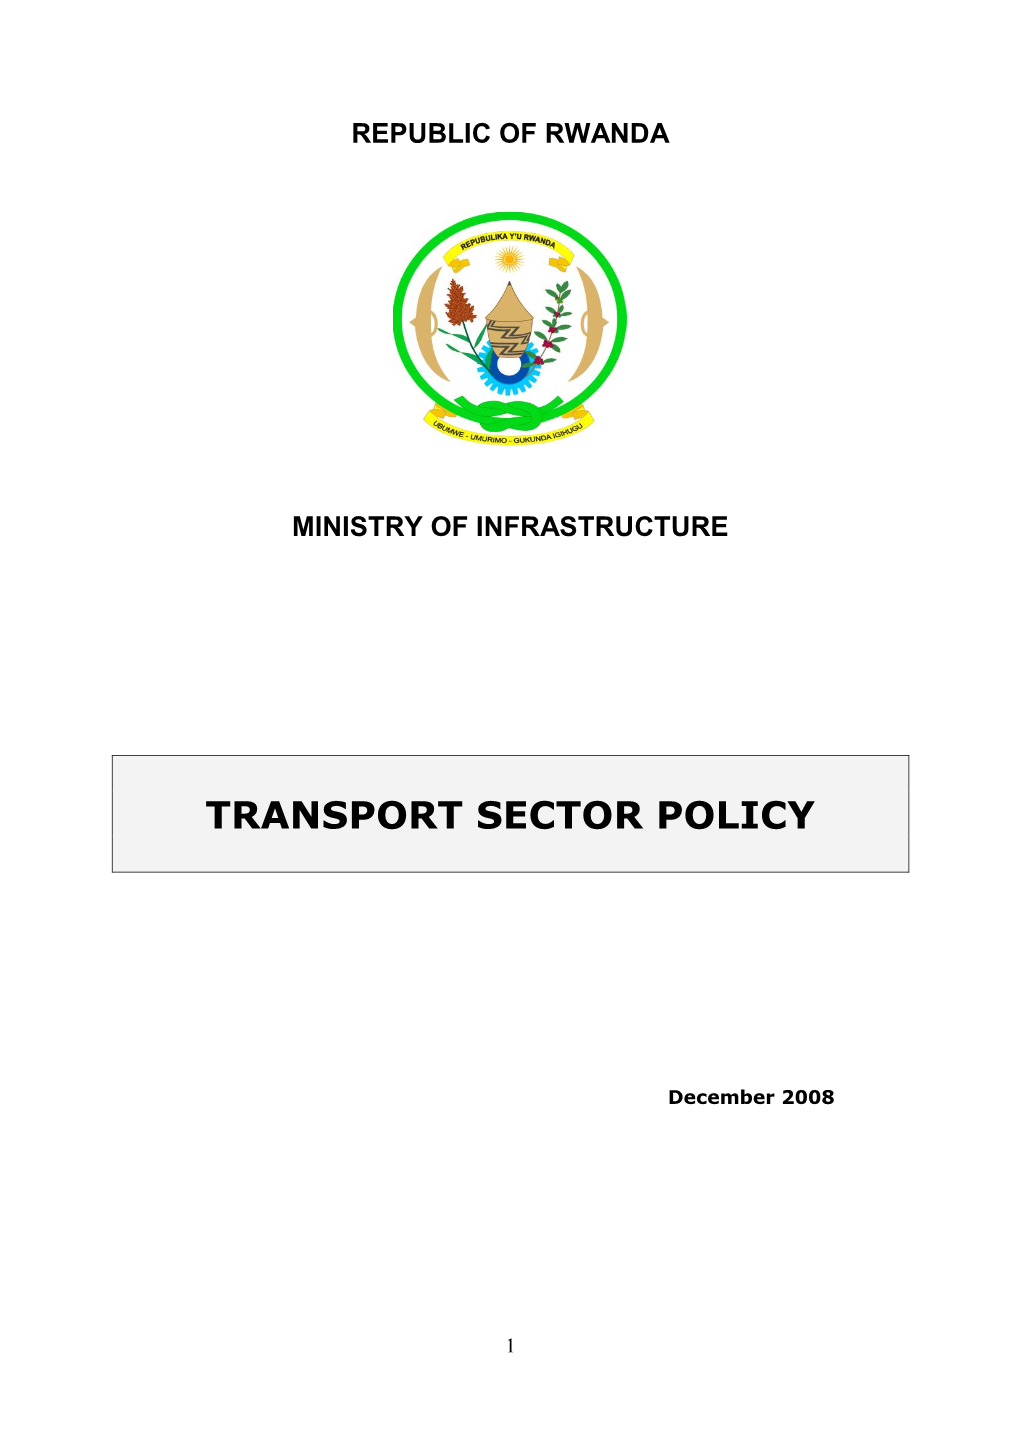 Transport Sector Policy